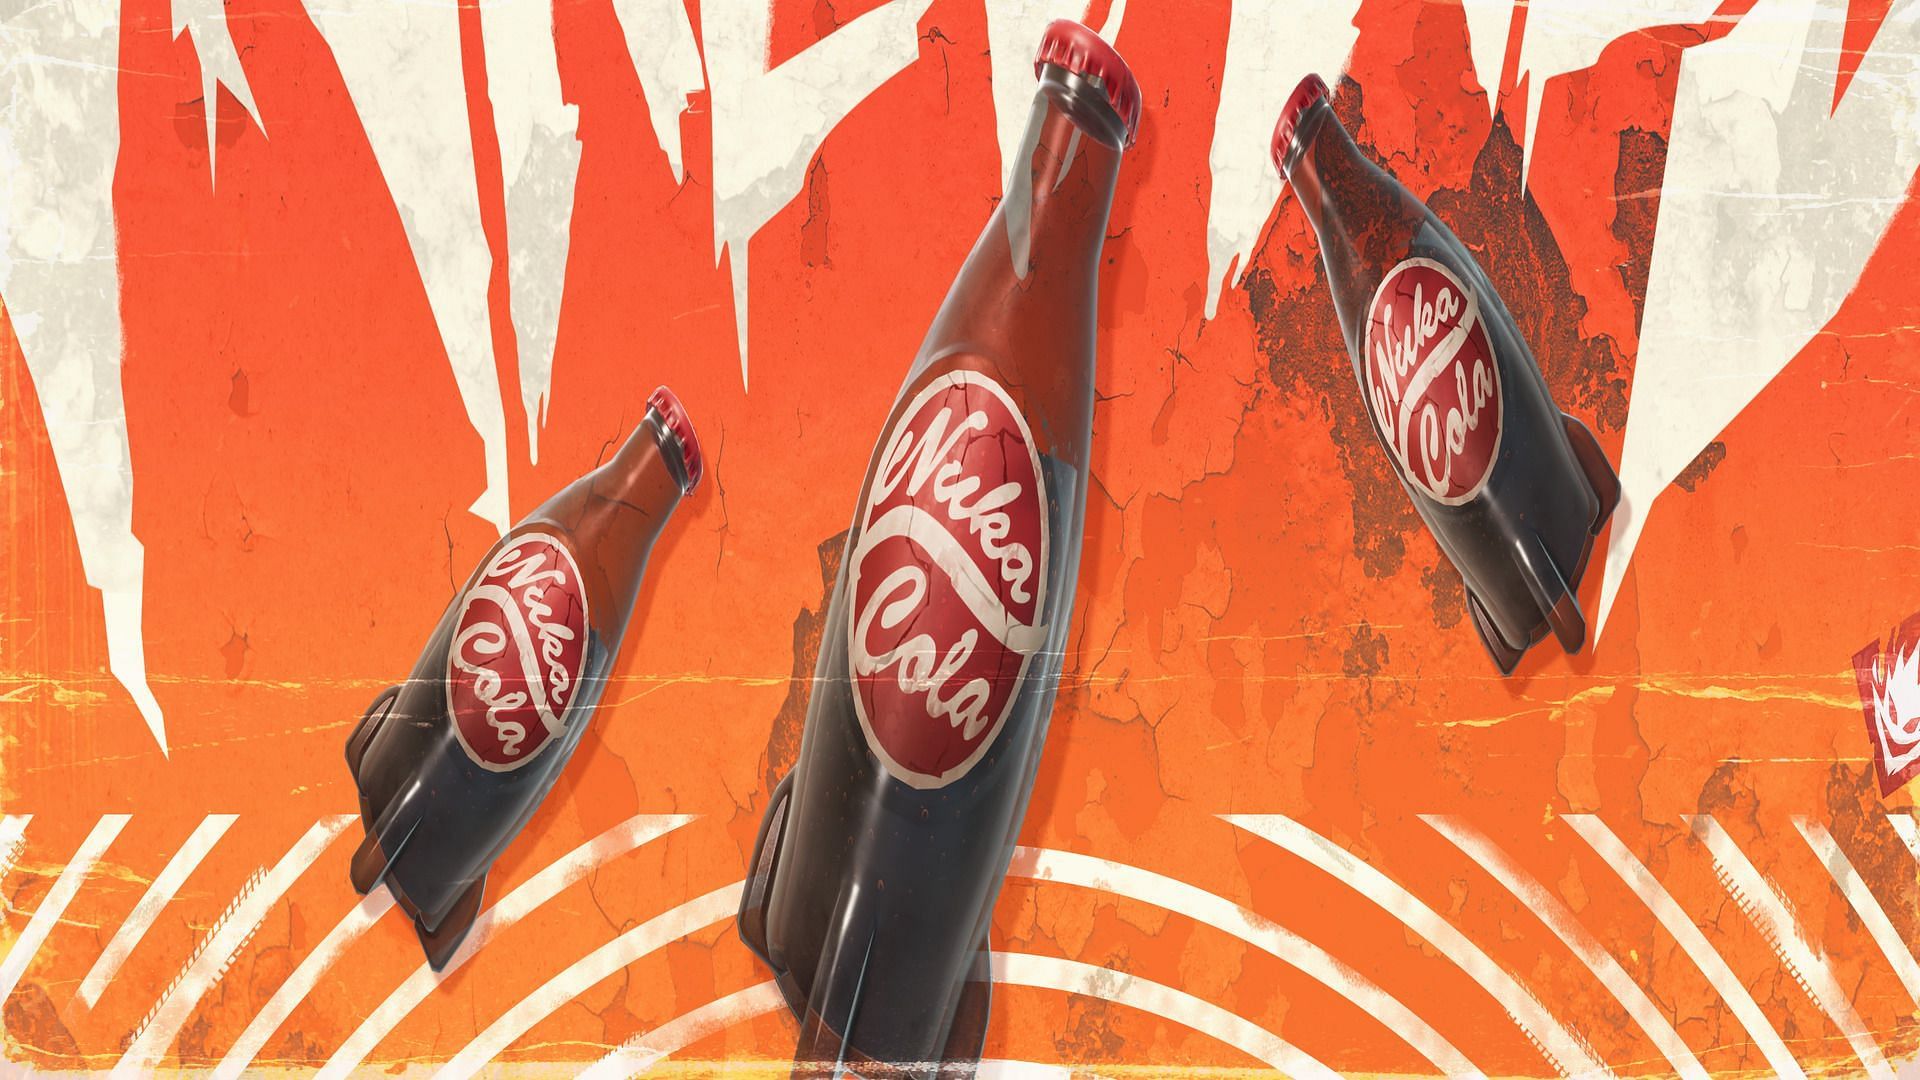 Quench your thirst with a cold glass of Nuka Cola (Image via Epic Games/ Fortnite)